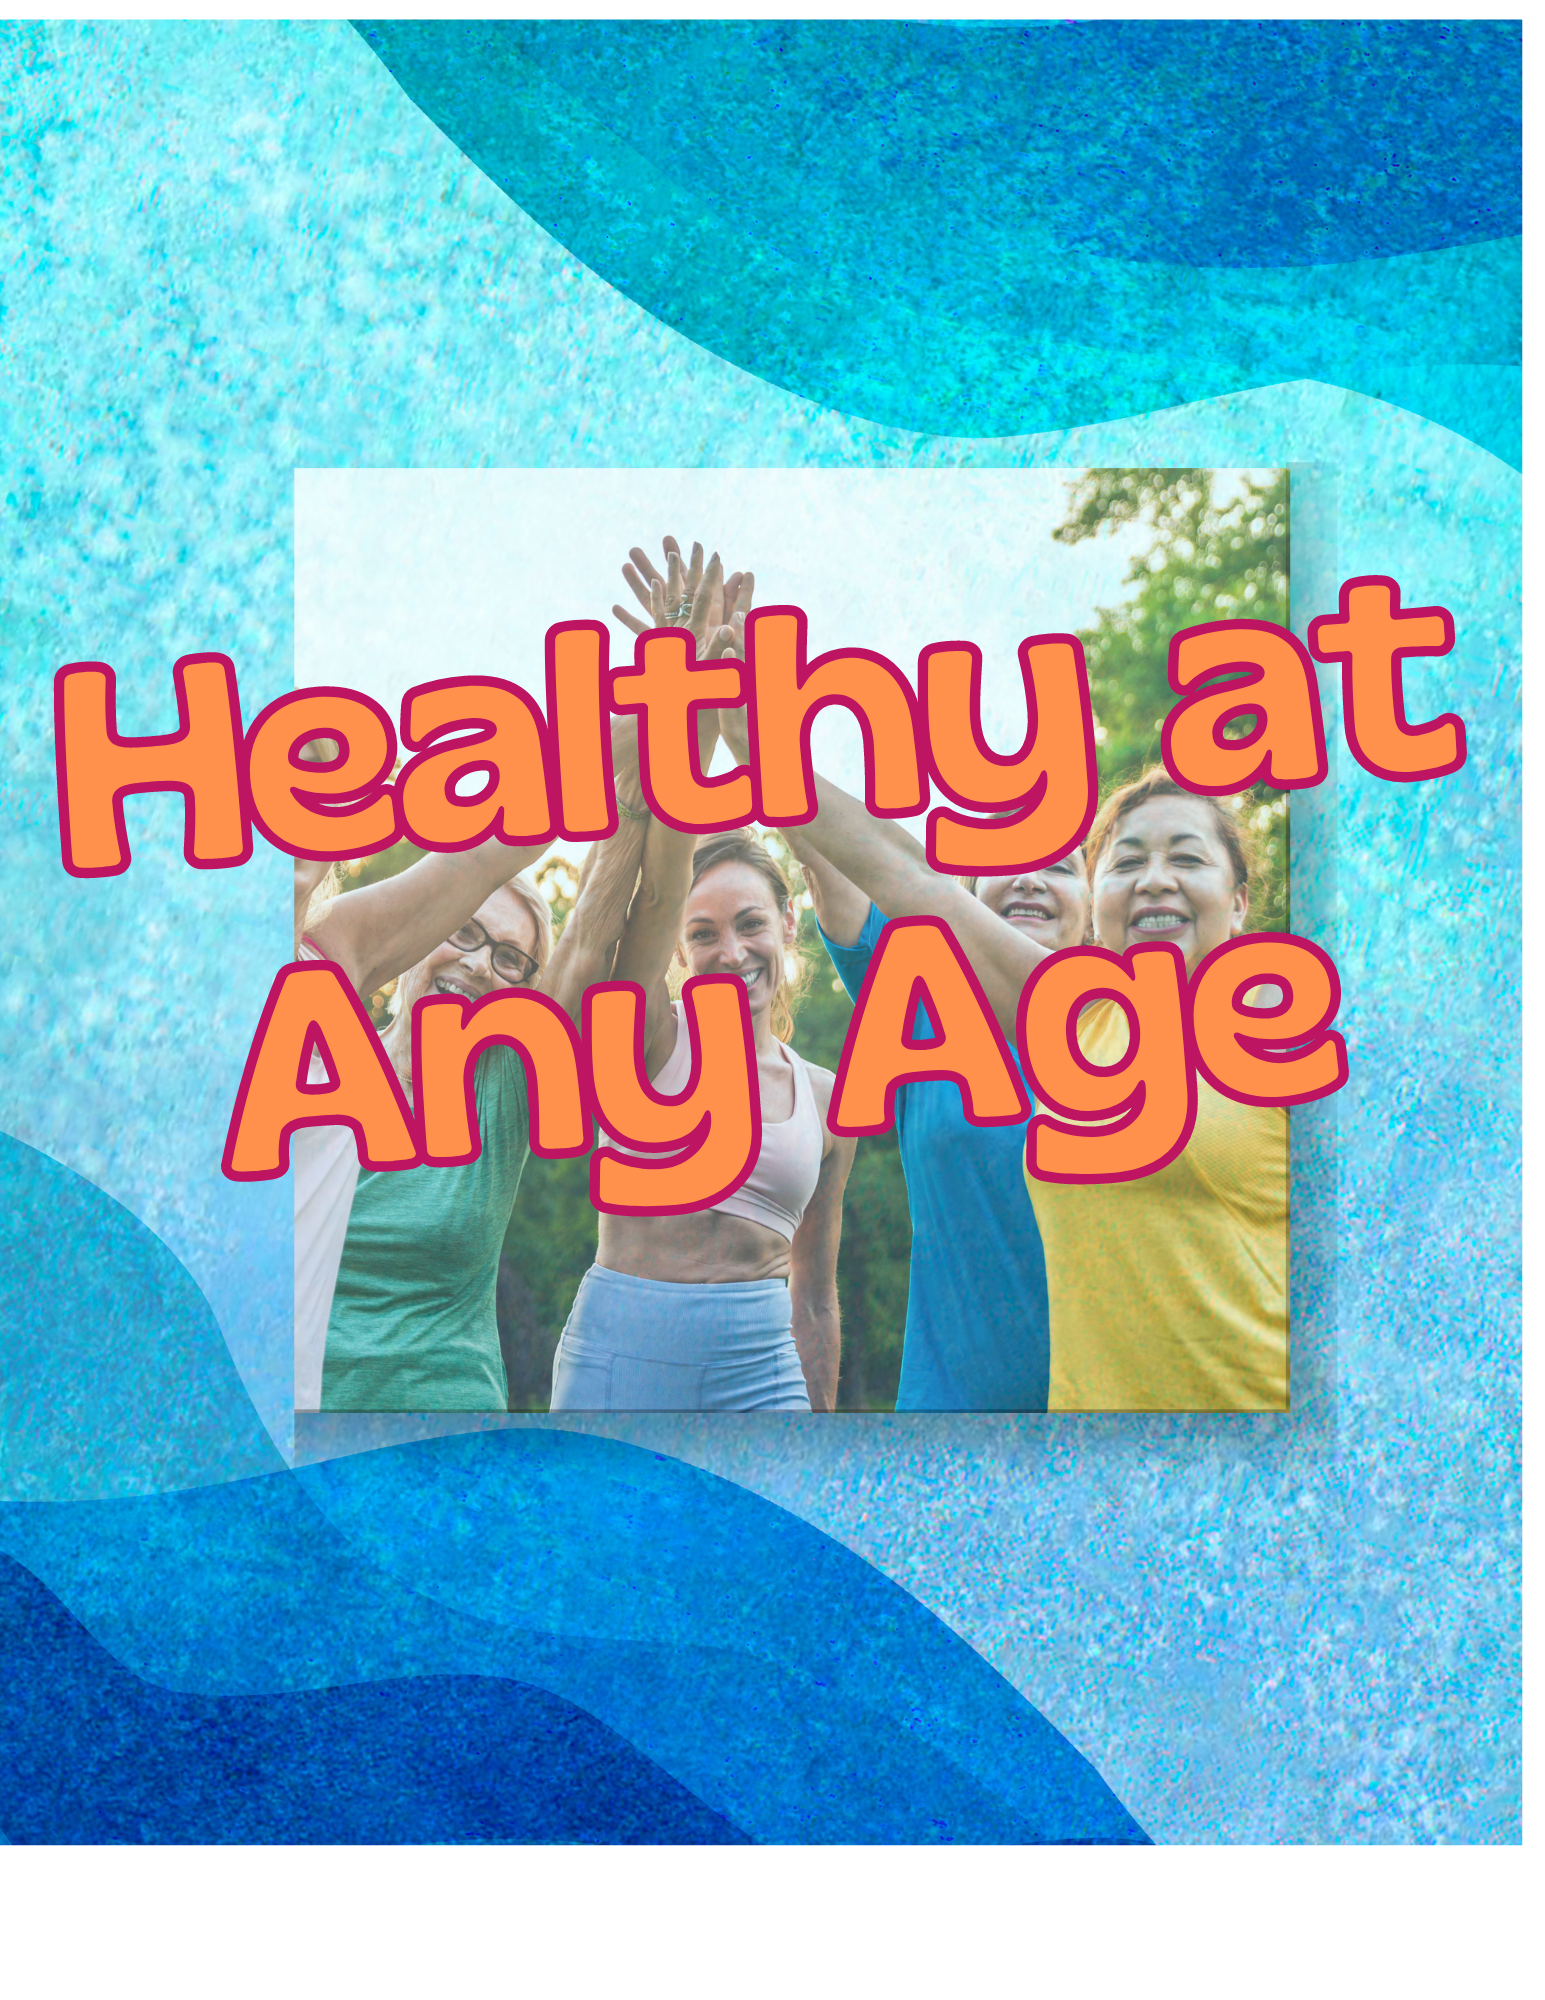 Guide for Healthy at any age.